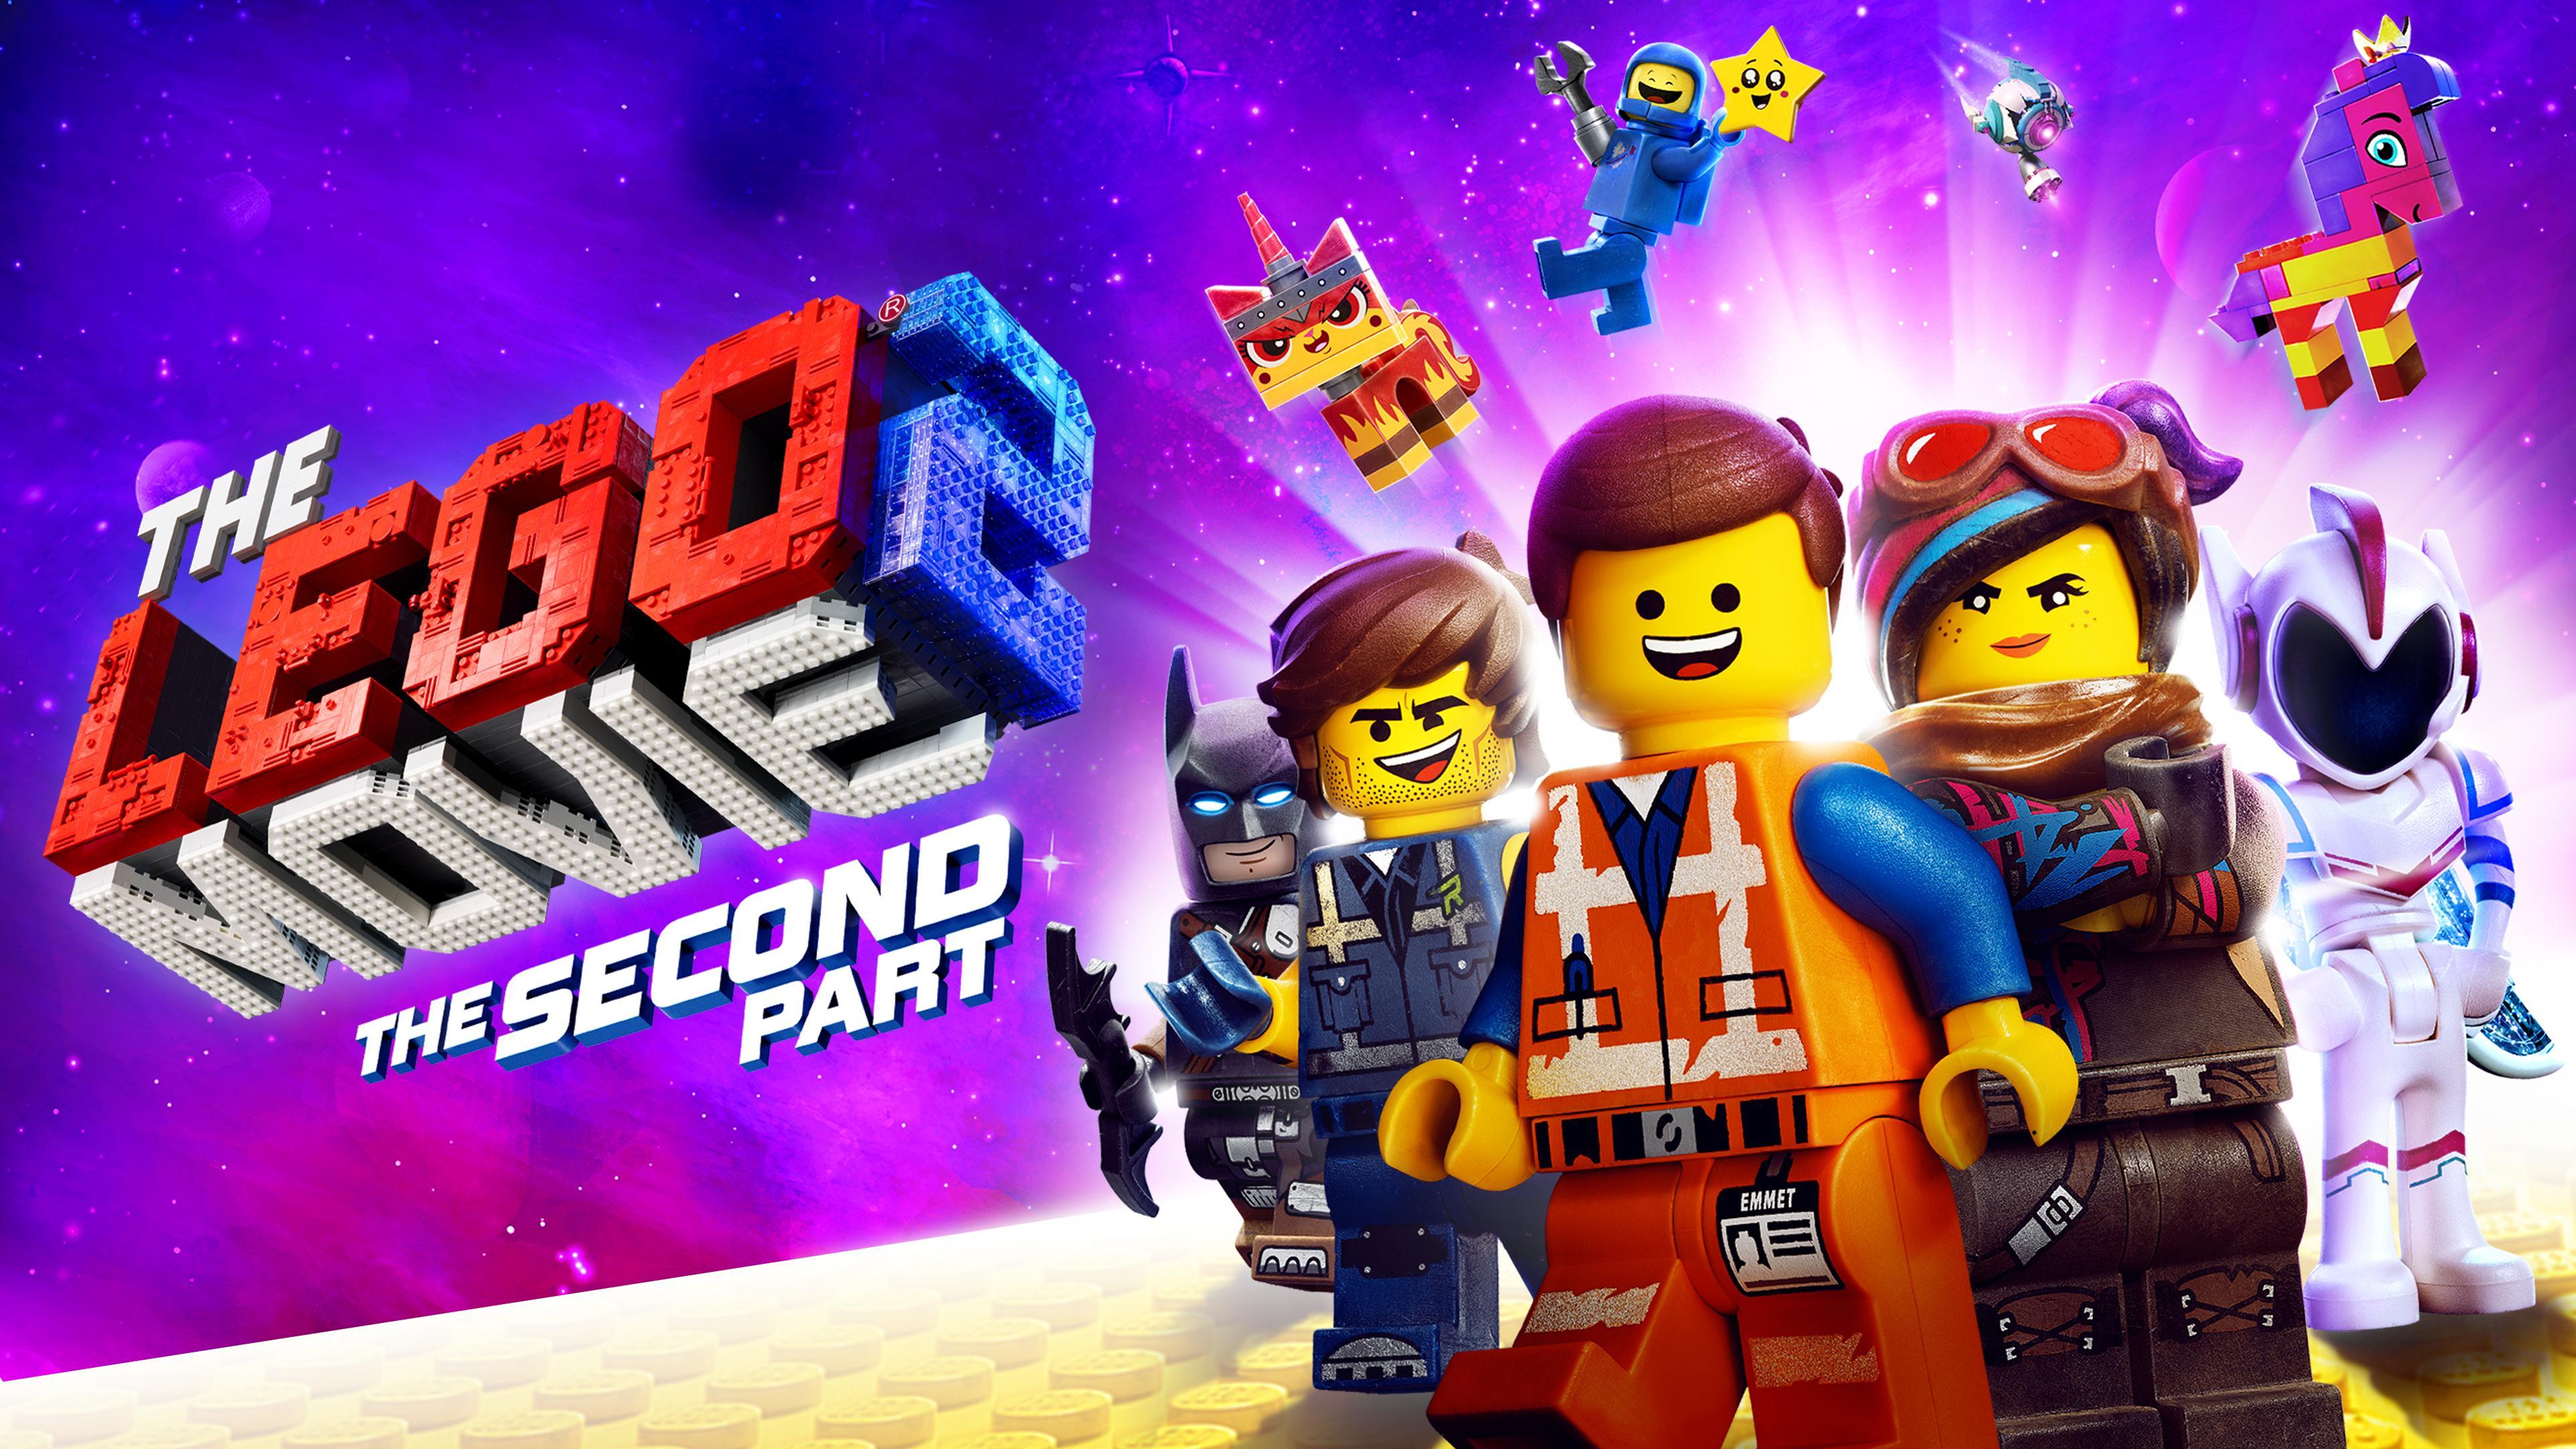 The LEGO Movie 2: The Second Part' (2019) - This animated film by